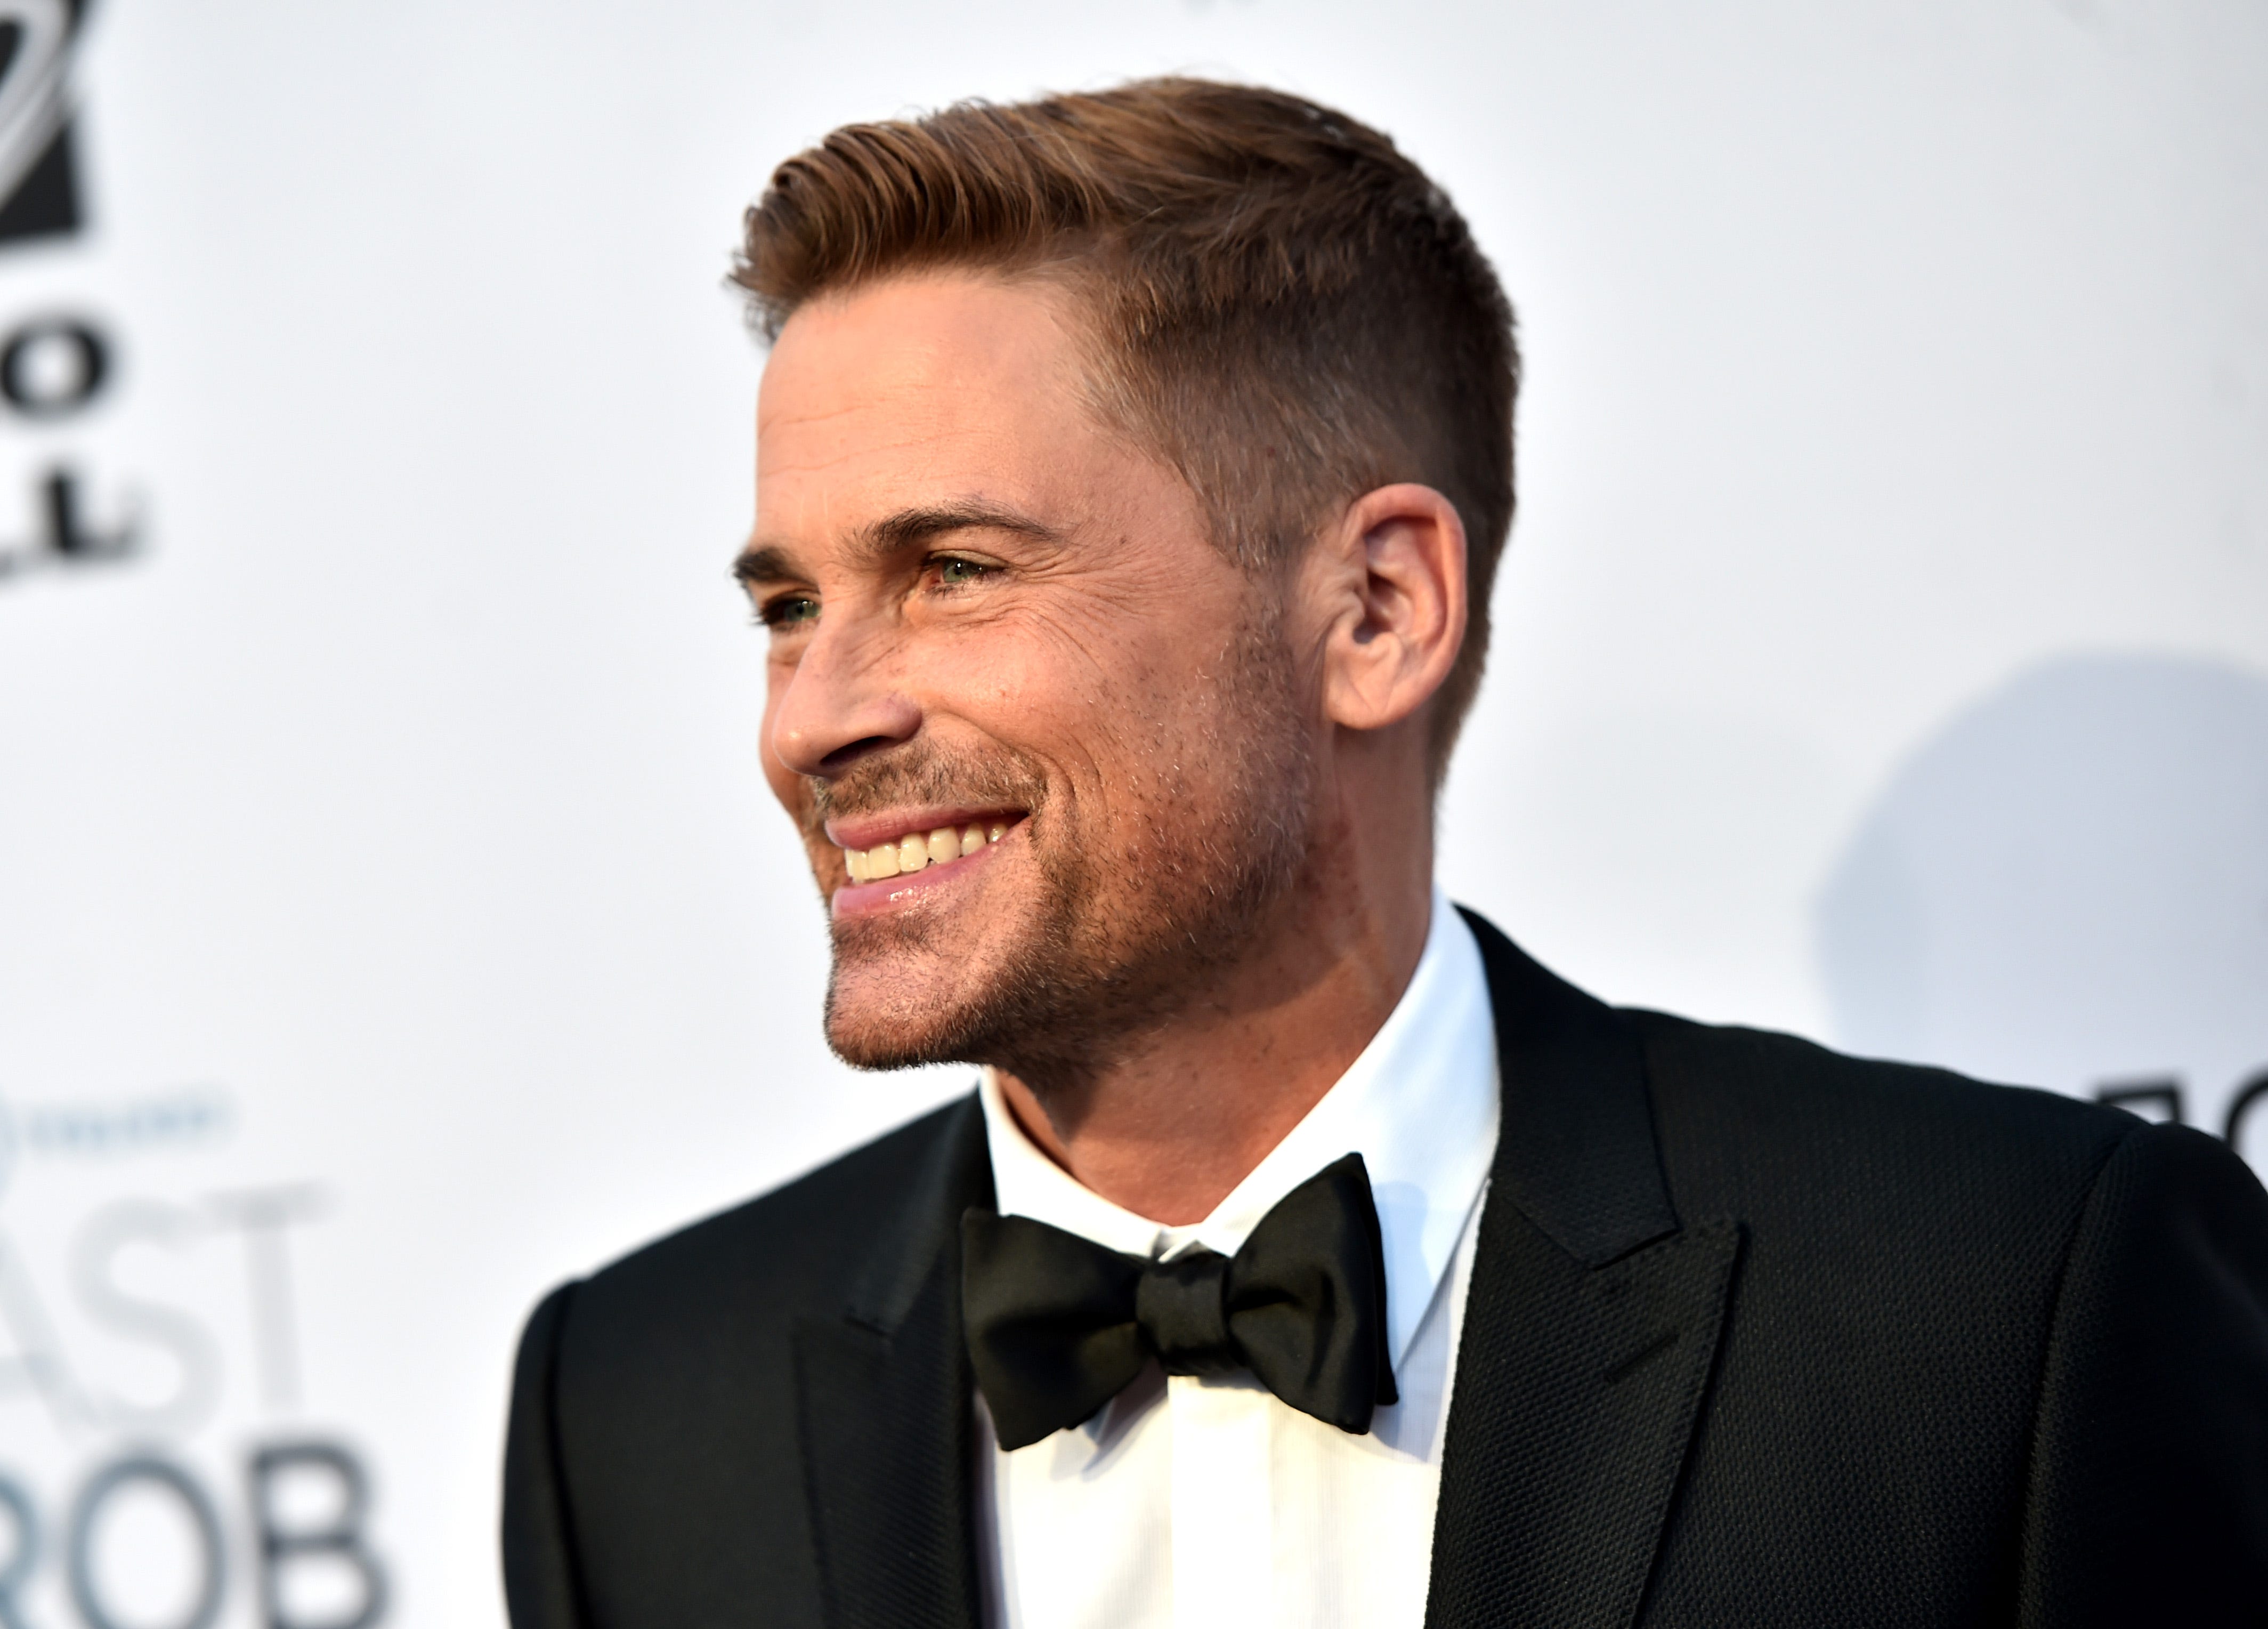 Rob Lowe: Caregivers need self-care to avoid national health care crisis